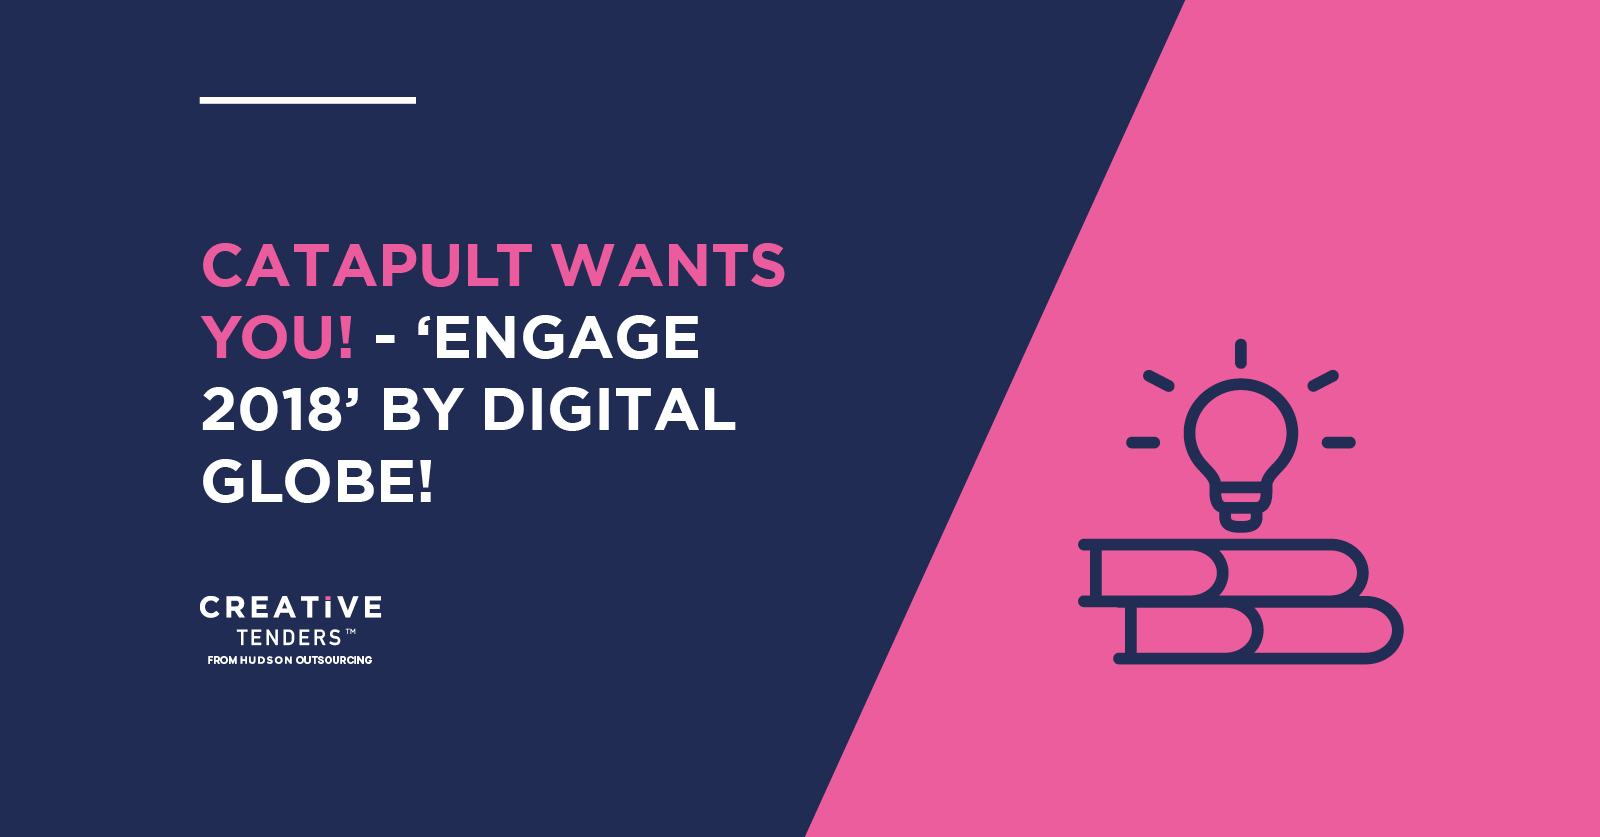 SMEs – Catapult wants YOU at the ‘Engage 2018’ event!